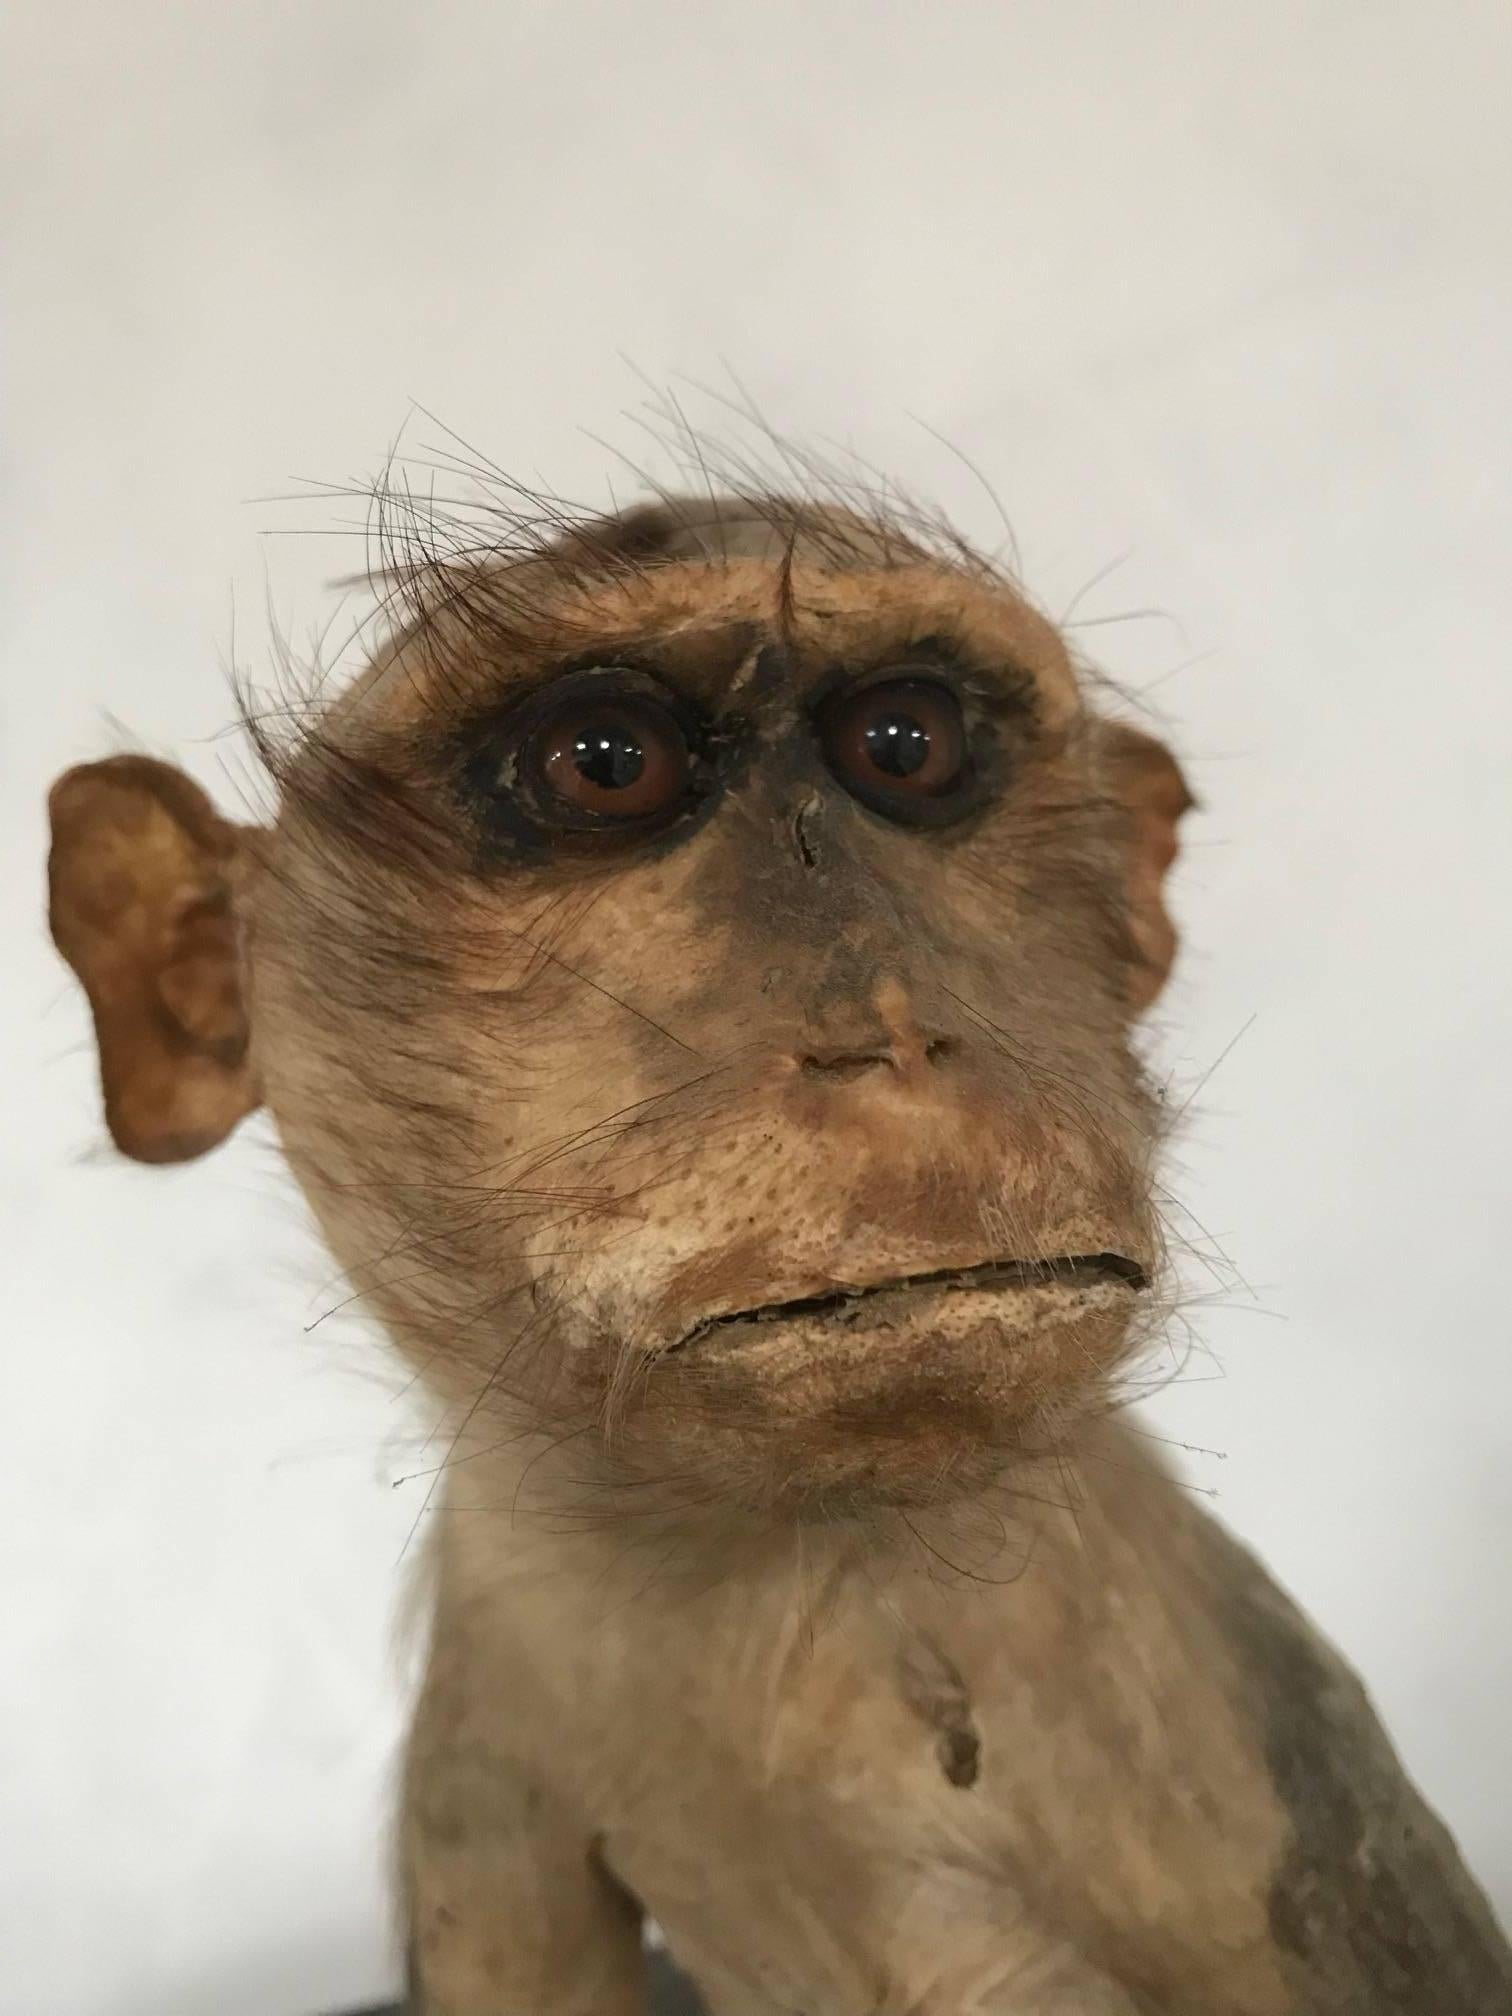 19th Century Victorian Stuffed Macaque Monkey Taxidermy Collectible Curiosity 1